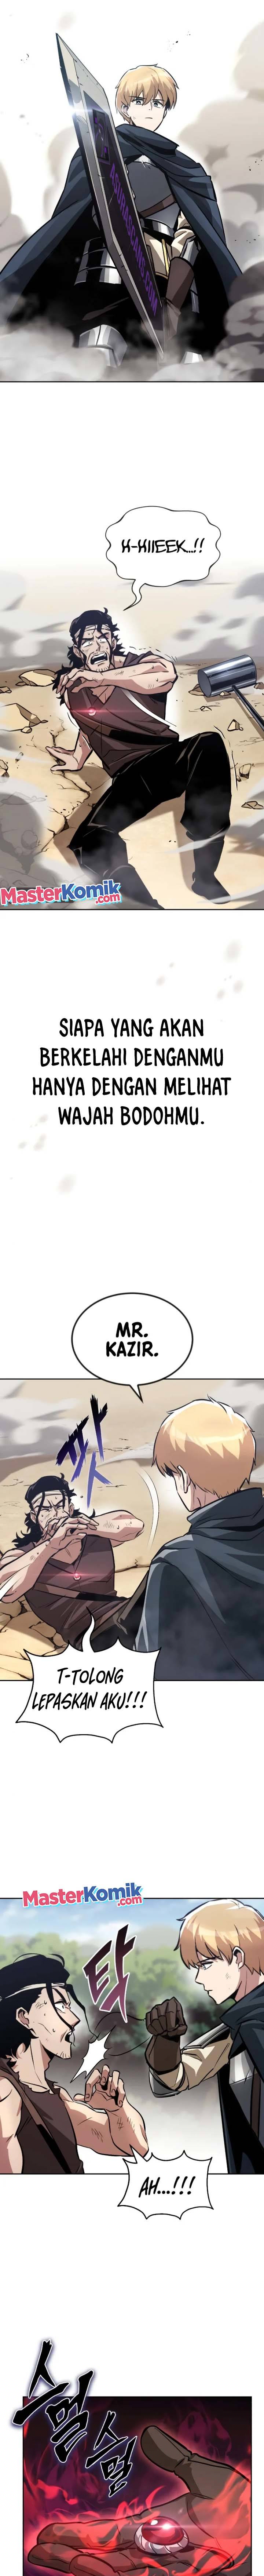 Lazy Prince Becomes a Genius Chapter 48